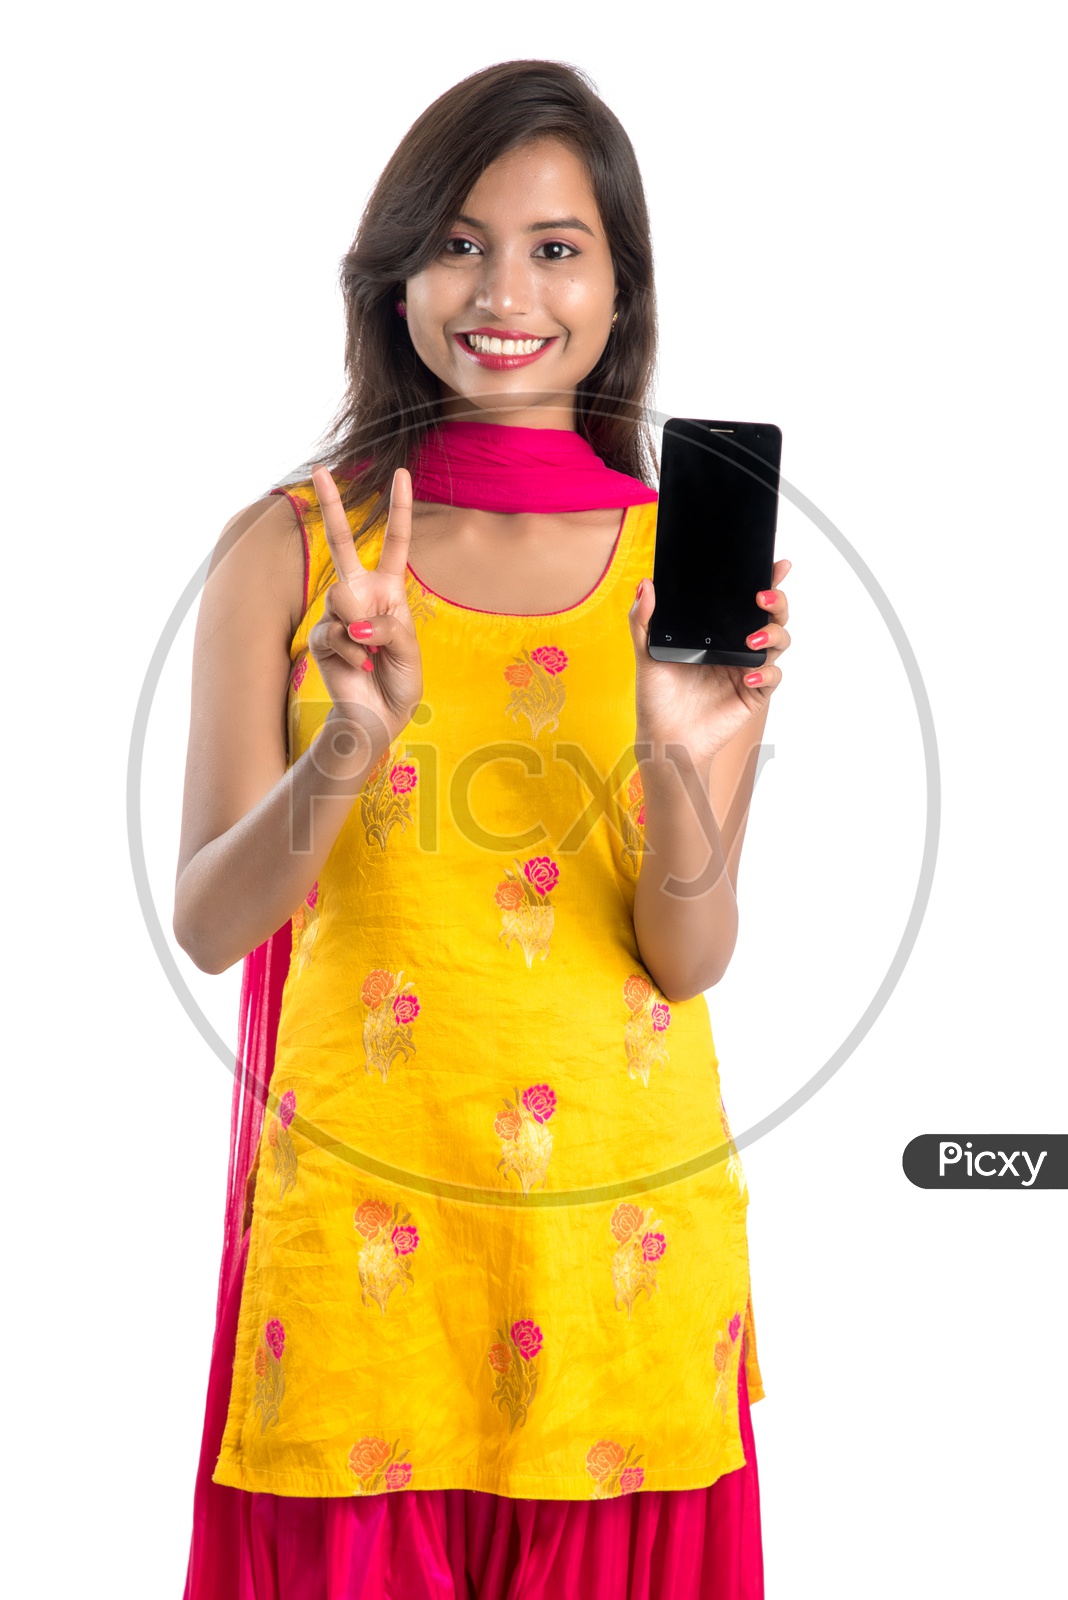 Beautiful Young Indian Girl Showing Mobile Screen With Smile Face and Gesture